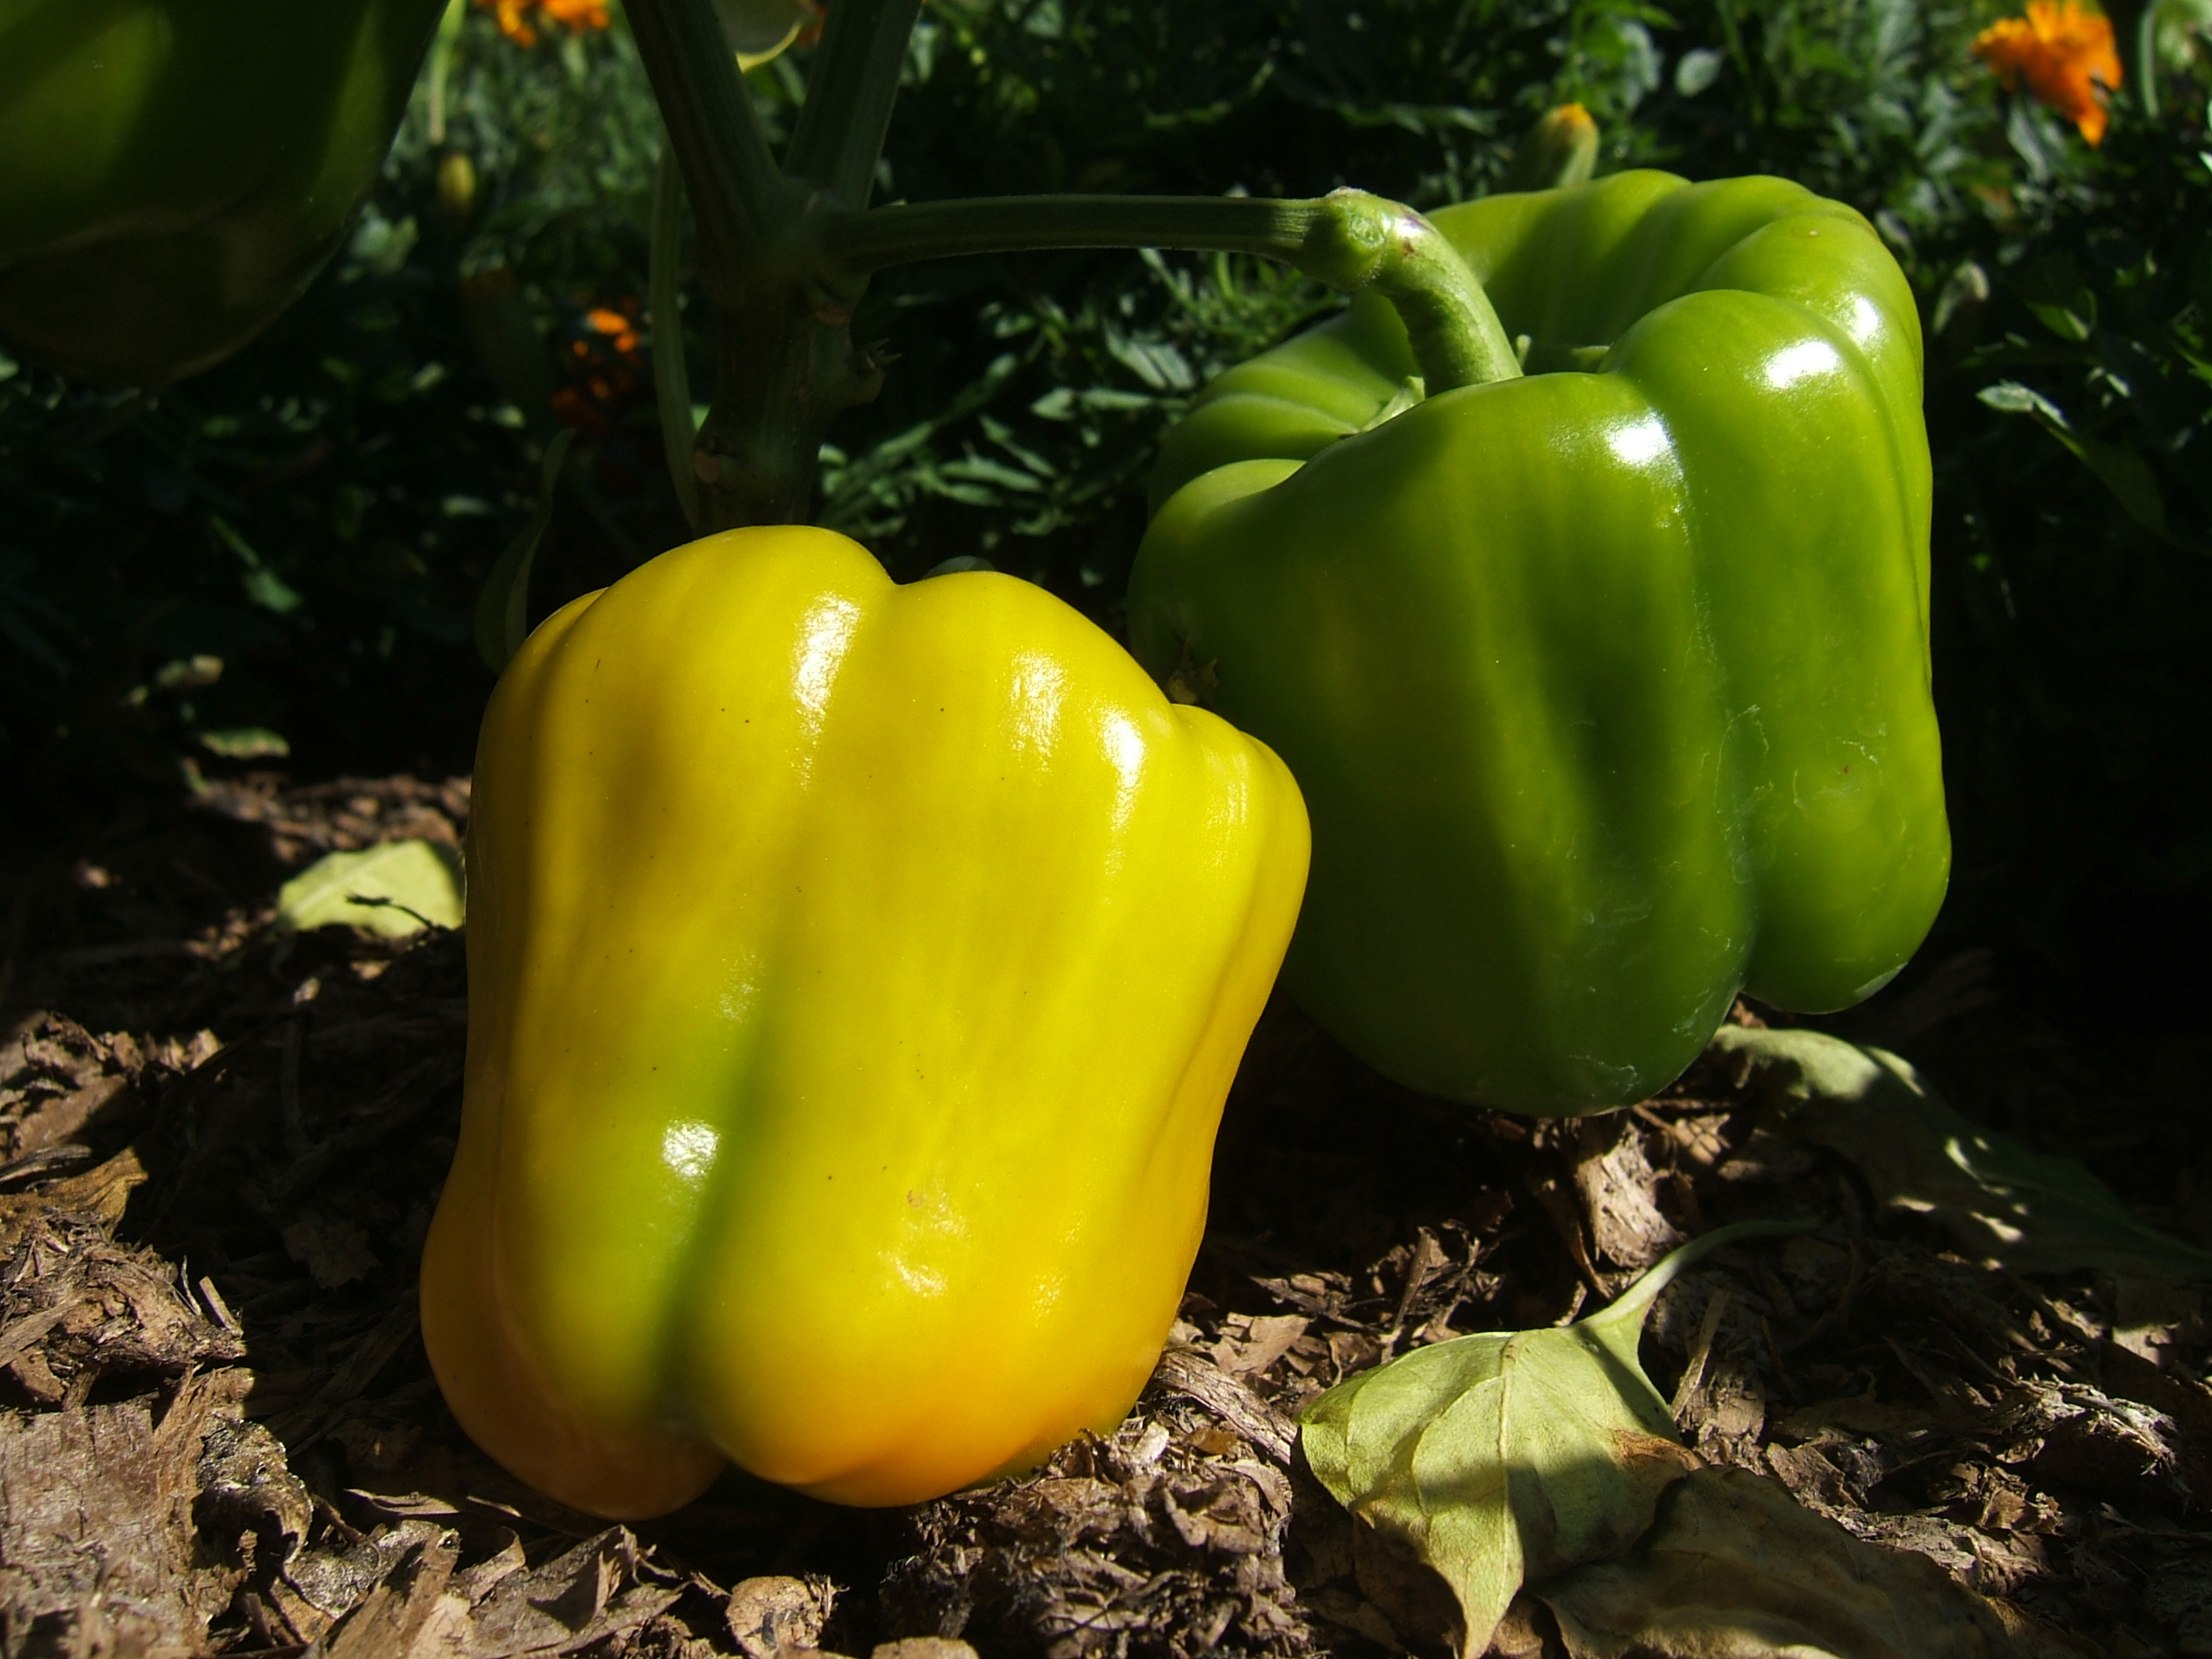 Are Bell Peppers Good for You? 4 Reasons to Eat More